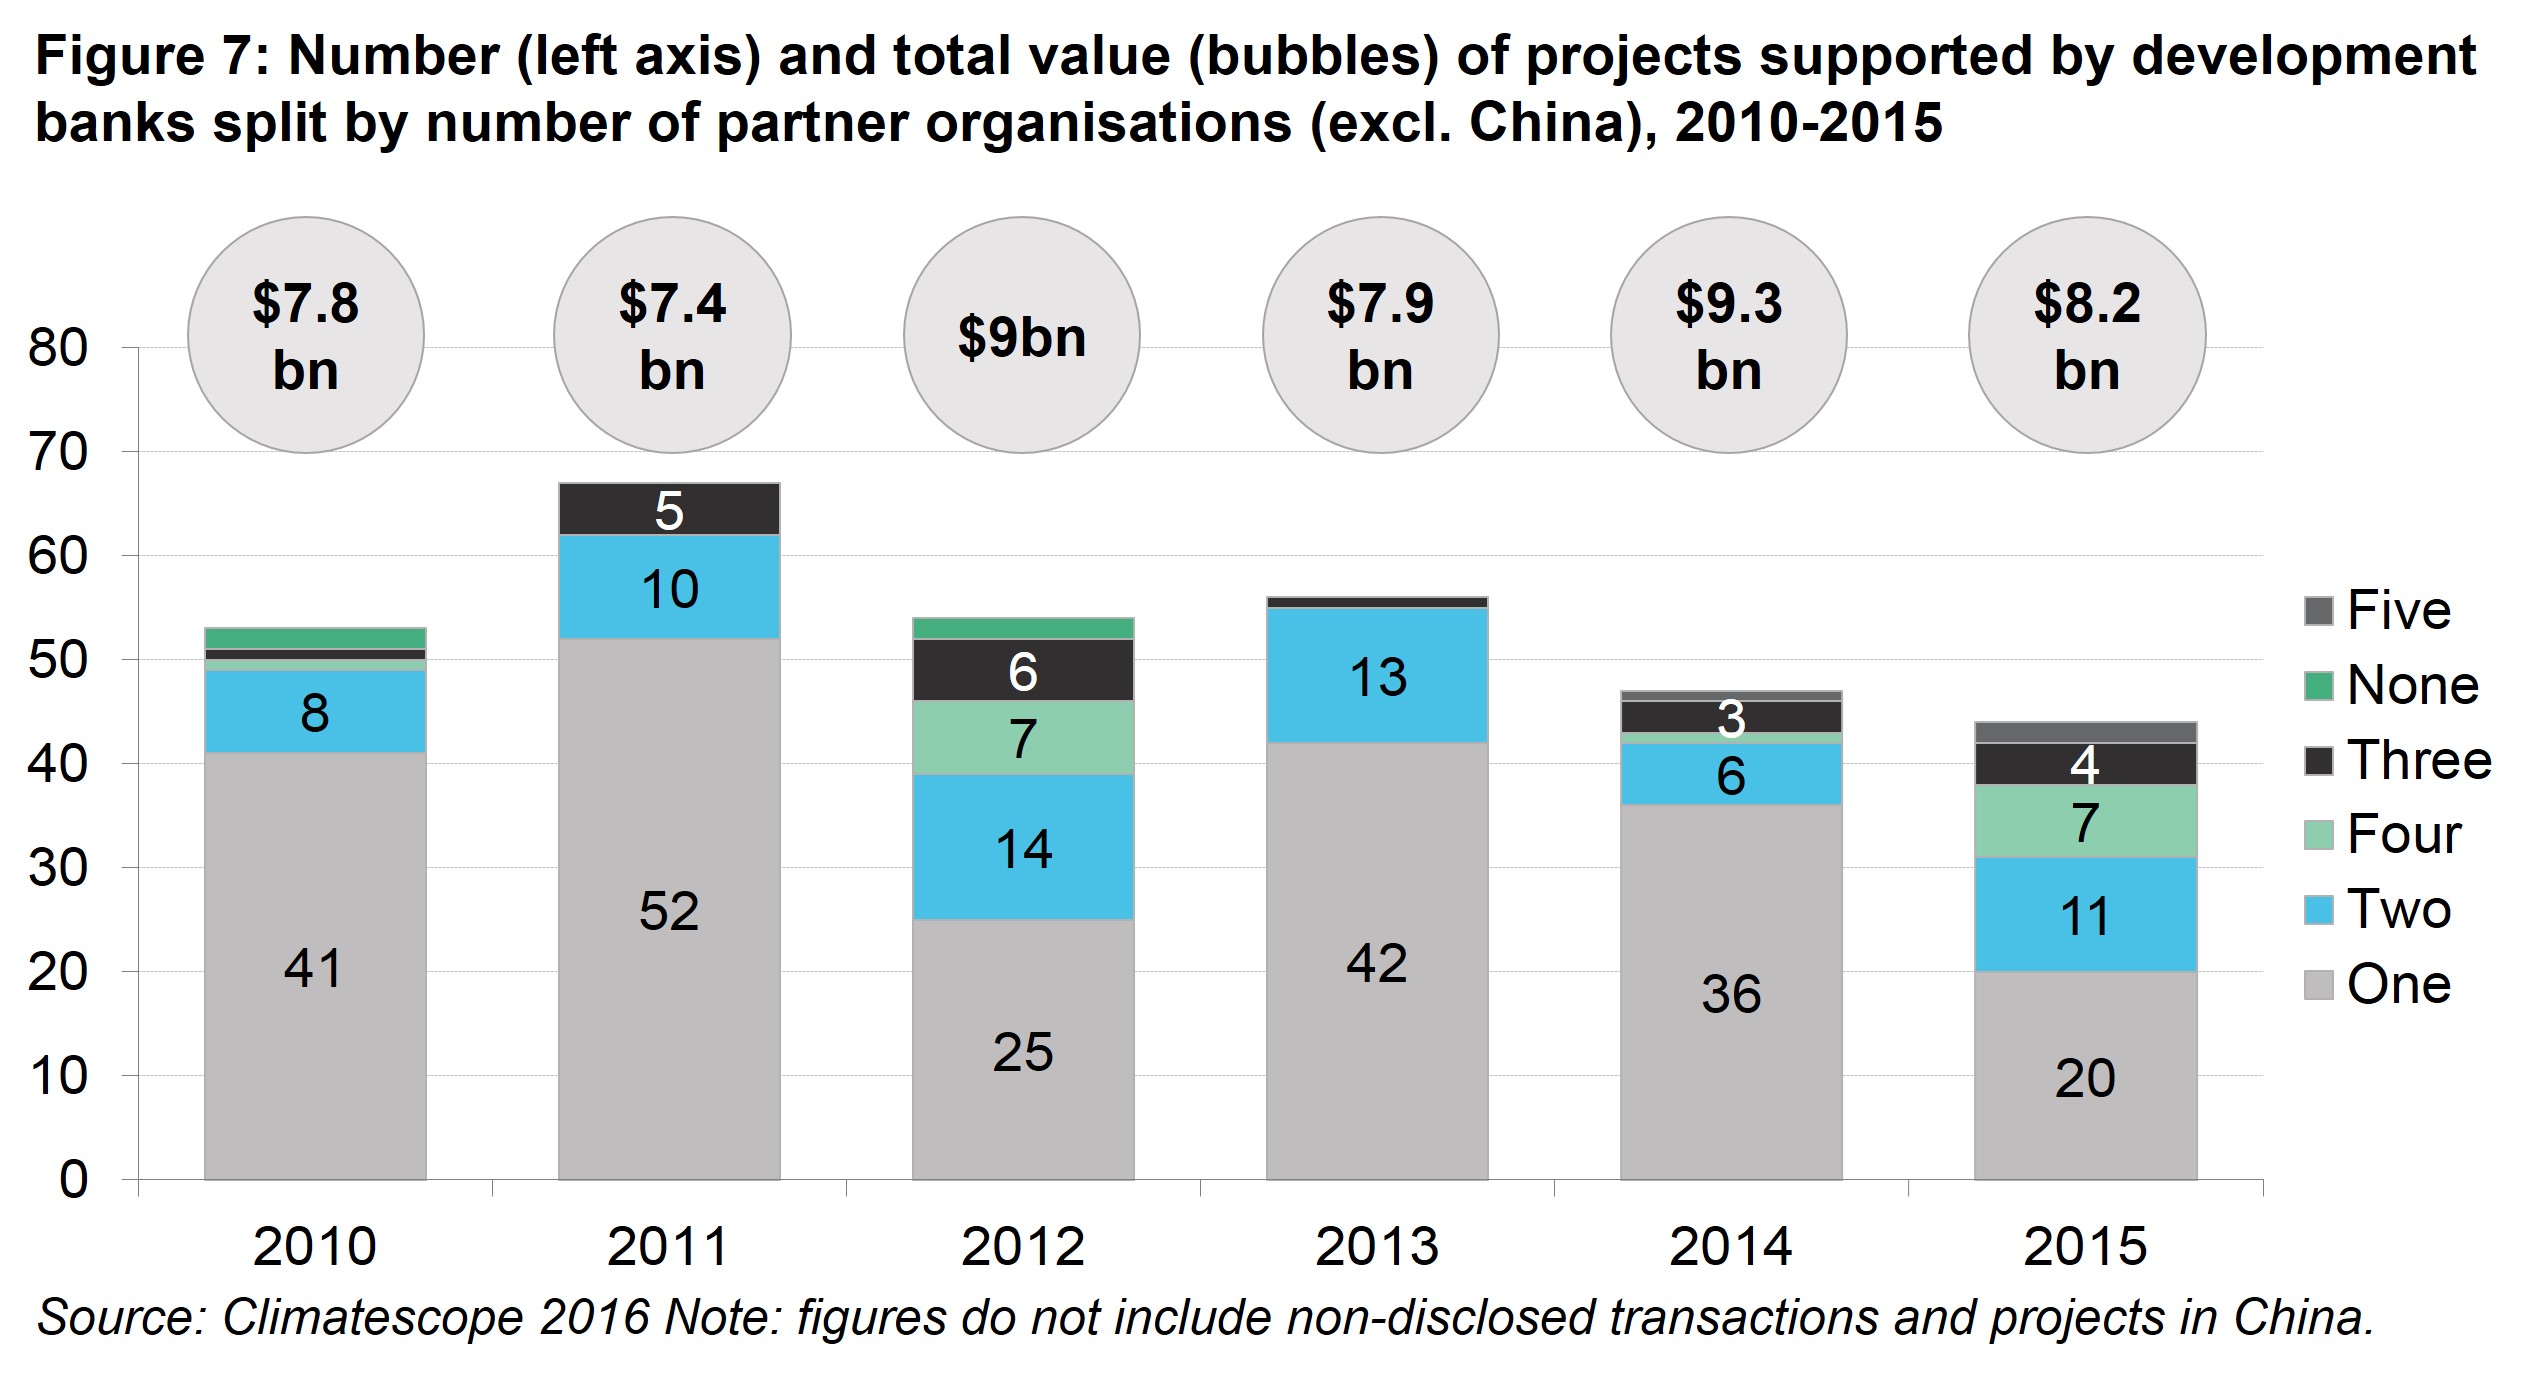 PII Fig 7 - Number (left axis) and total value (bubbles) of projects supported by development banks split by number of partner organisations (excl. China), 2010-2015 